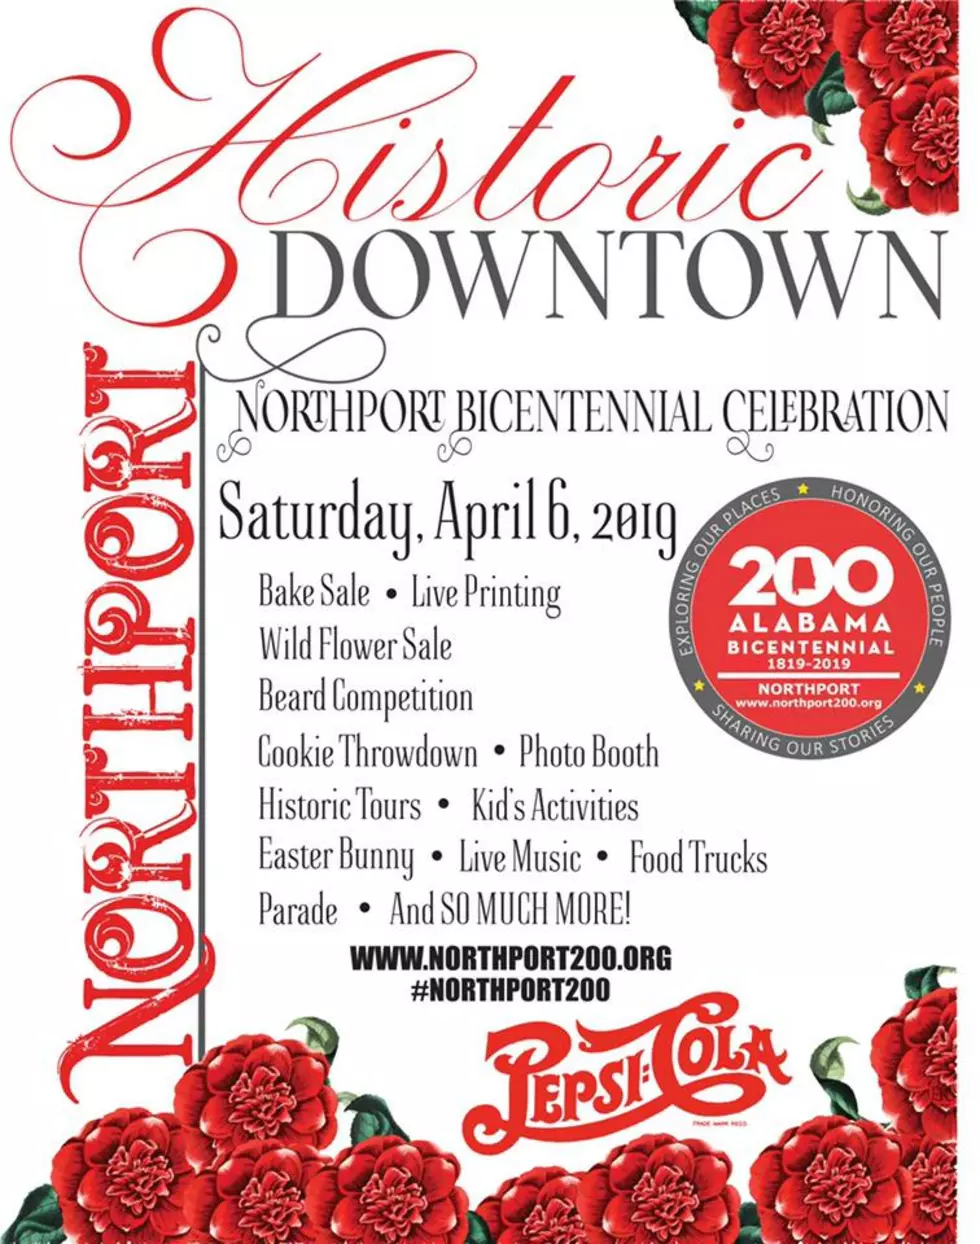 City of Northport to Host Bicentennial Celebration Saturday, April 6